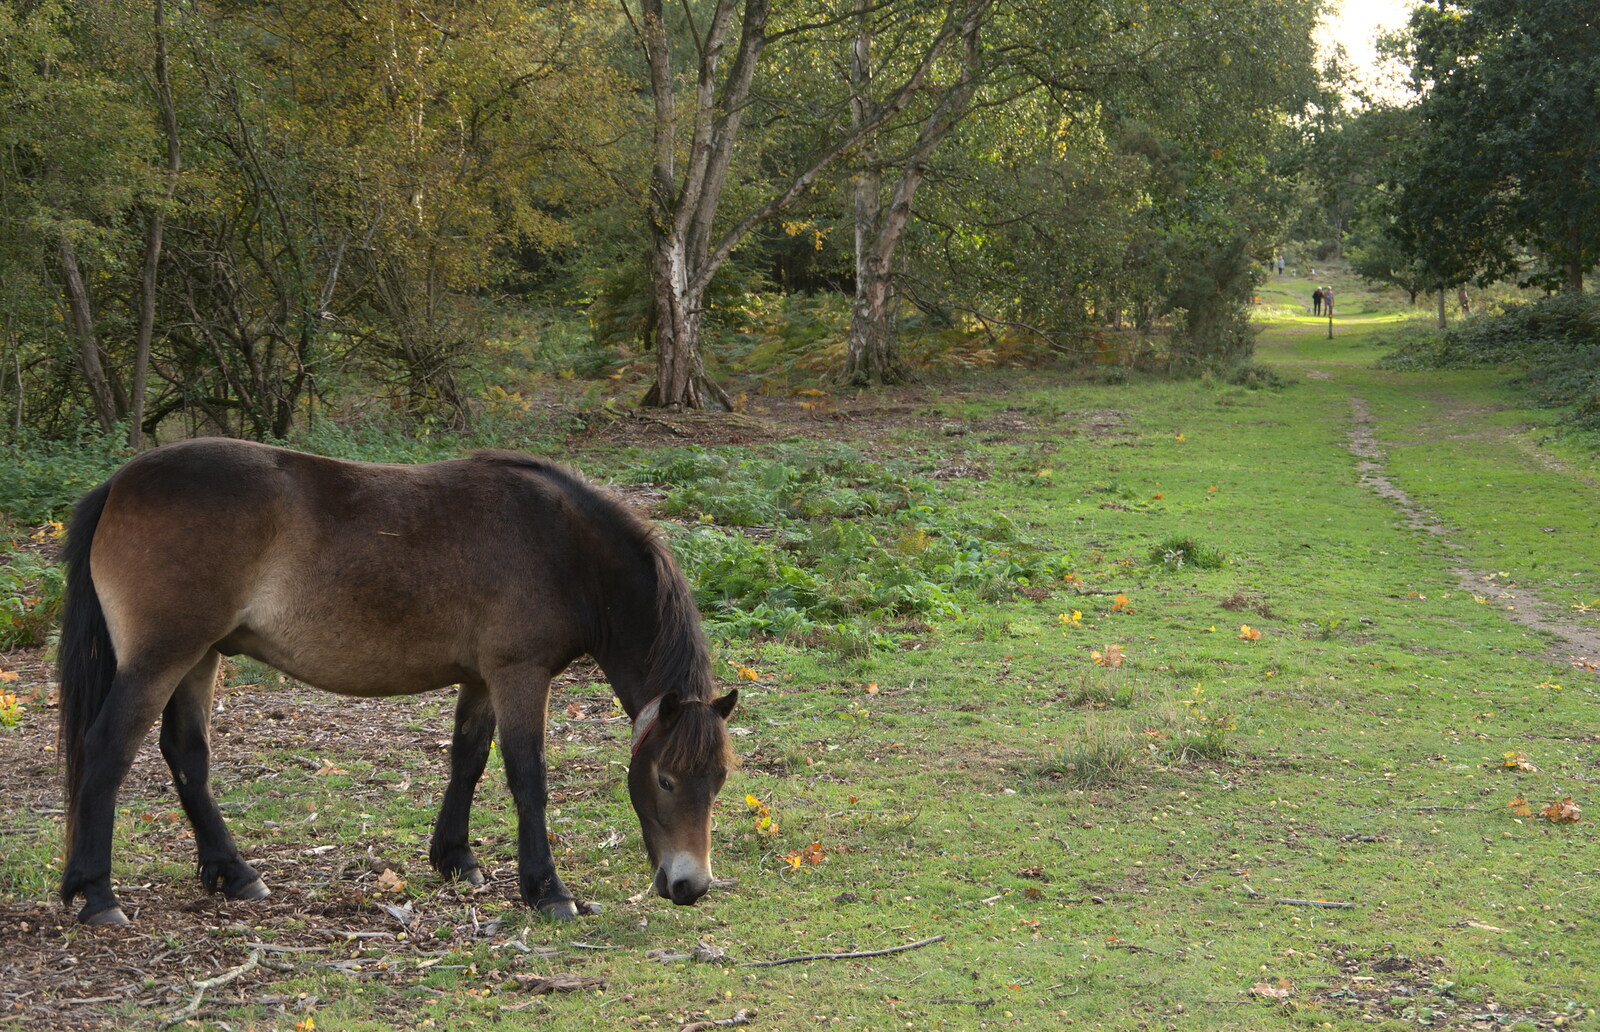 A grazing pony from Evidence of Autumn: Geocaching on Knettishall Heath, Suffolk - 7th October 2018